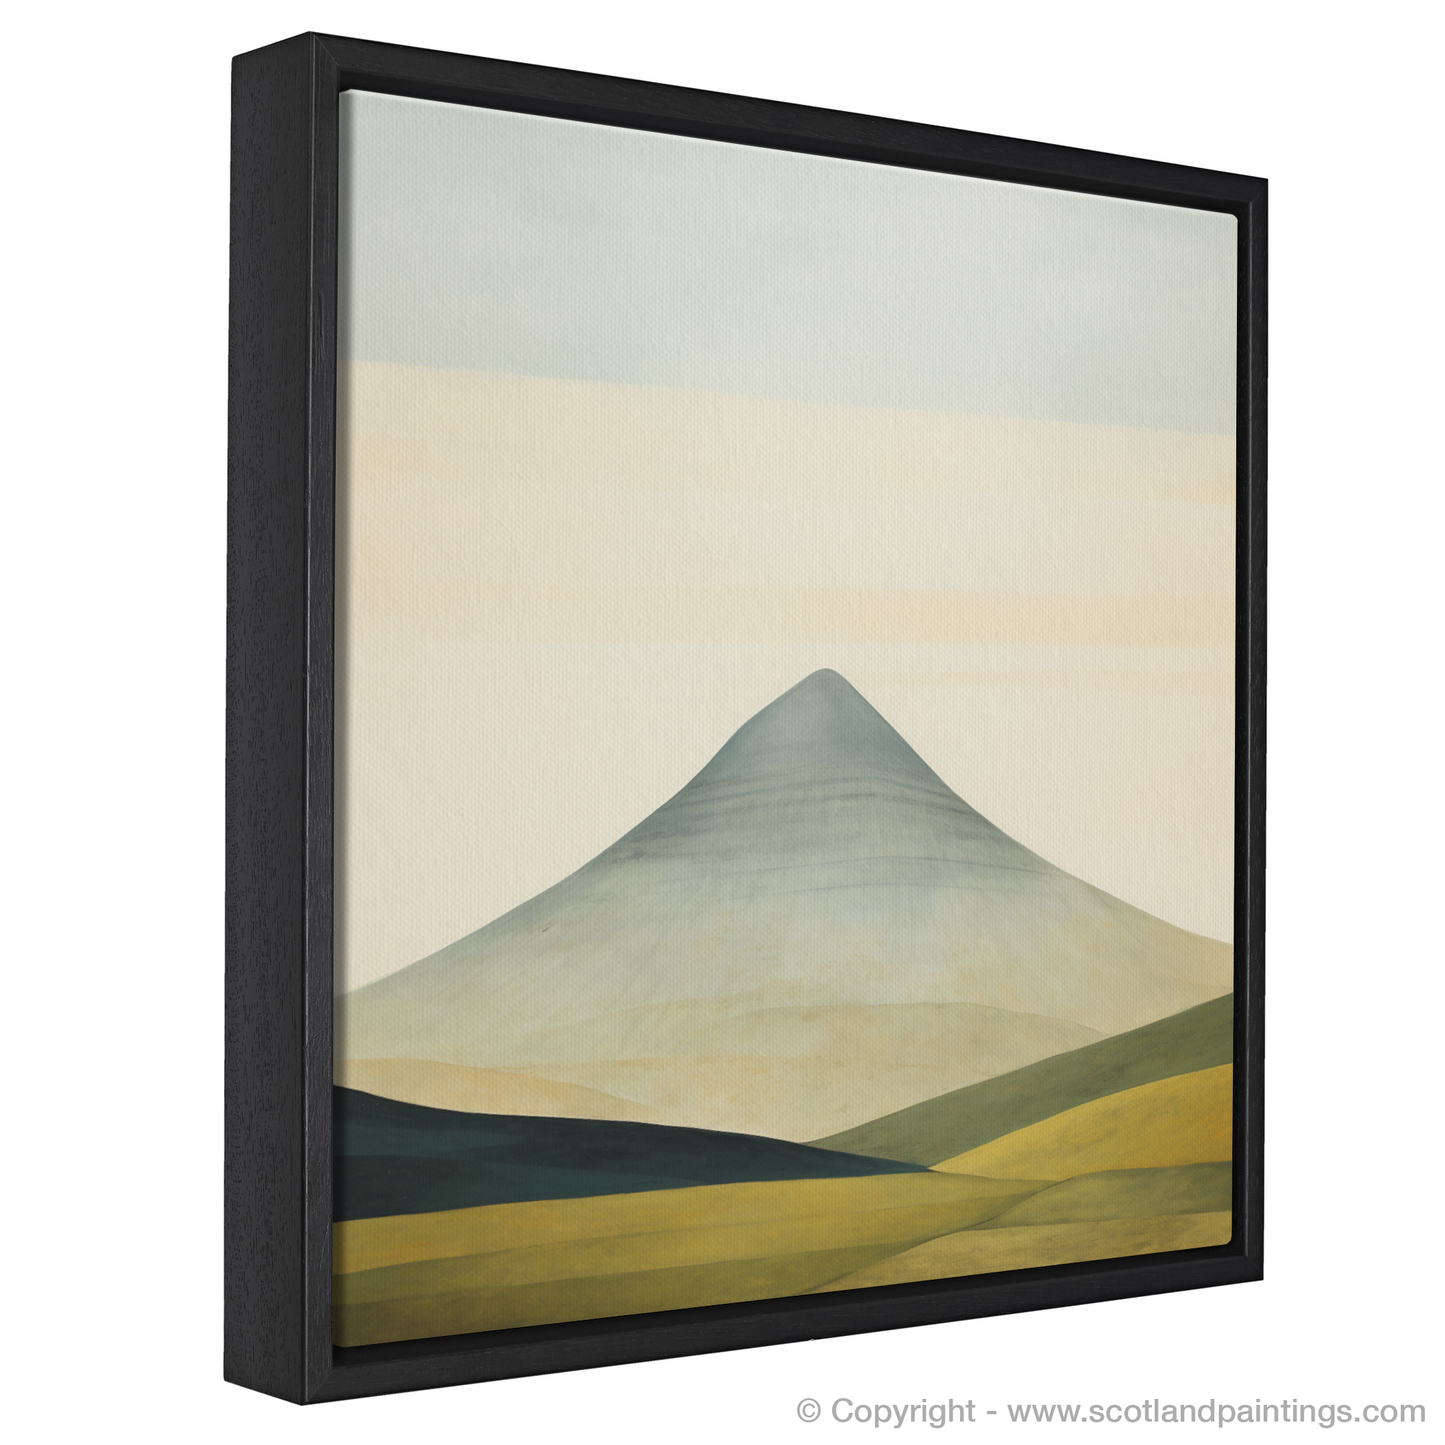 Painting and Art Print of Meall Garbh (Càrn Mairg) entitled "Abstract Apex: Meall Garbh Reimagined".